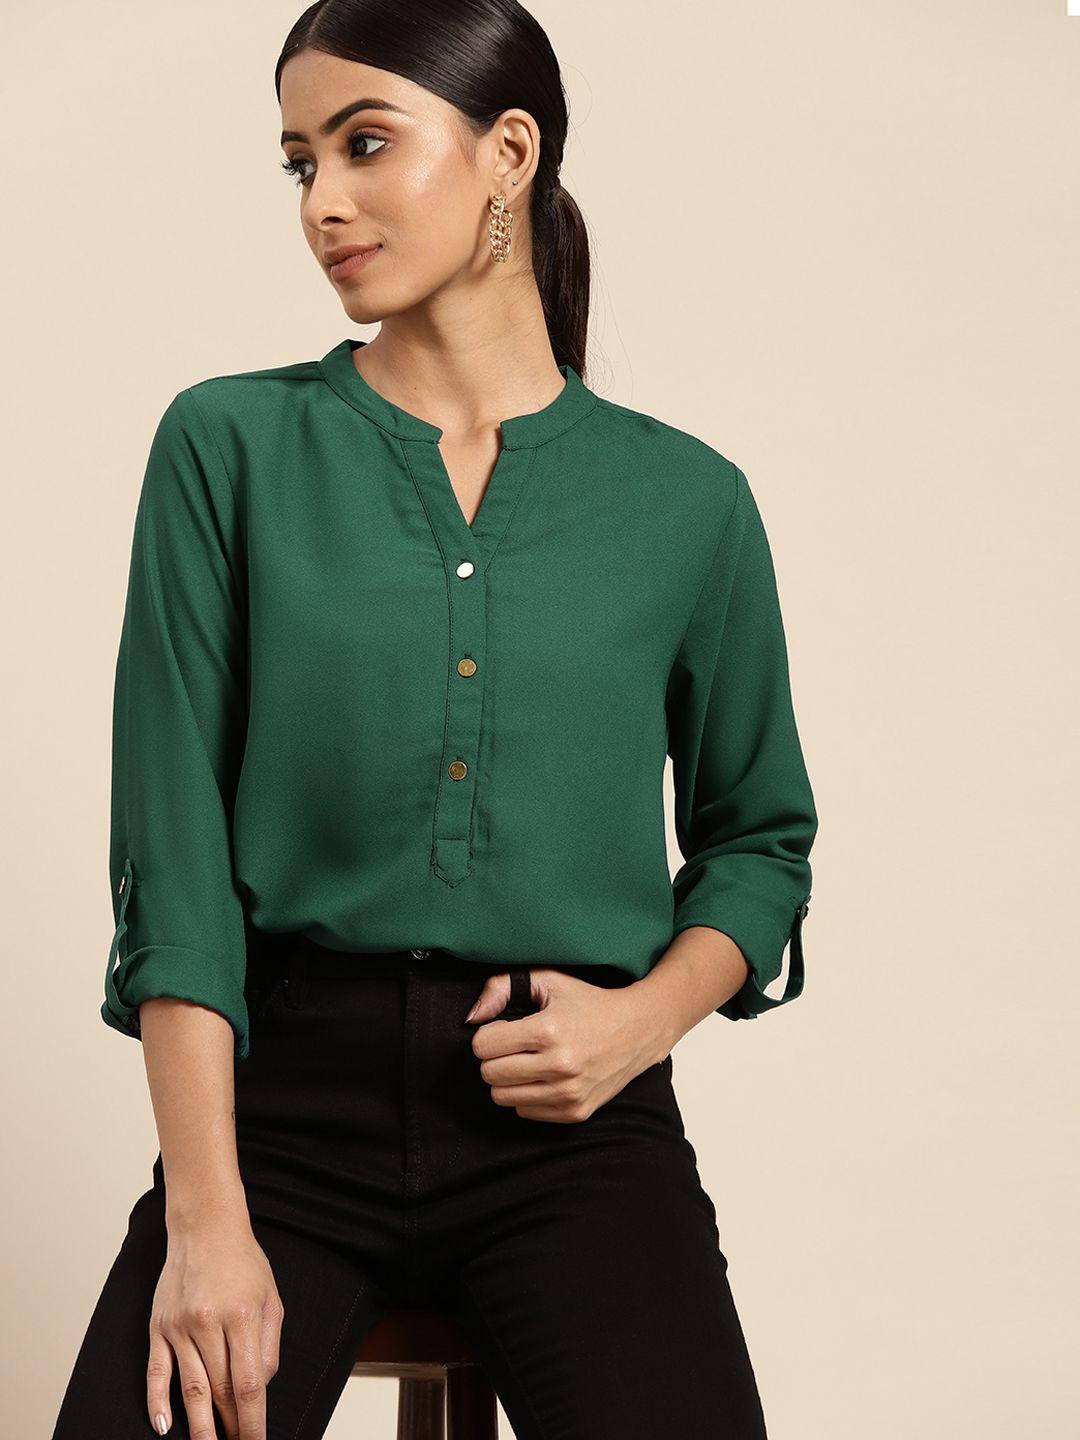 all-about-you-women-green-solid-shirt-style-top